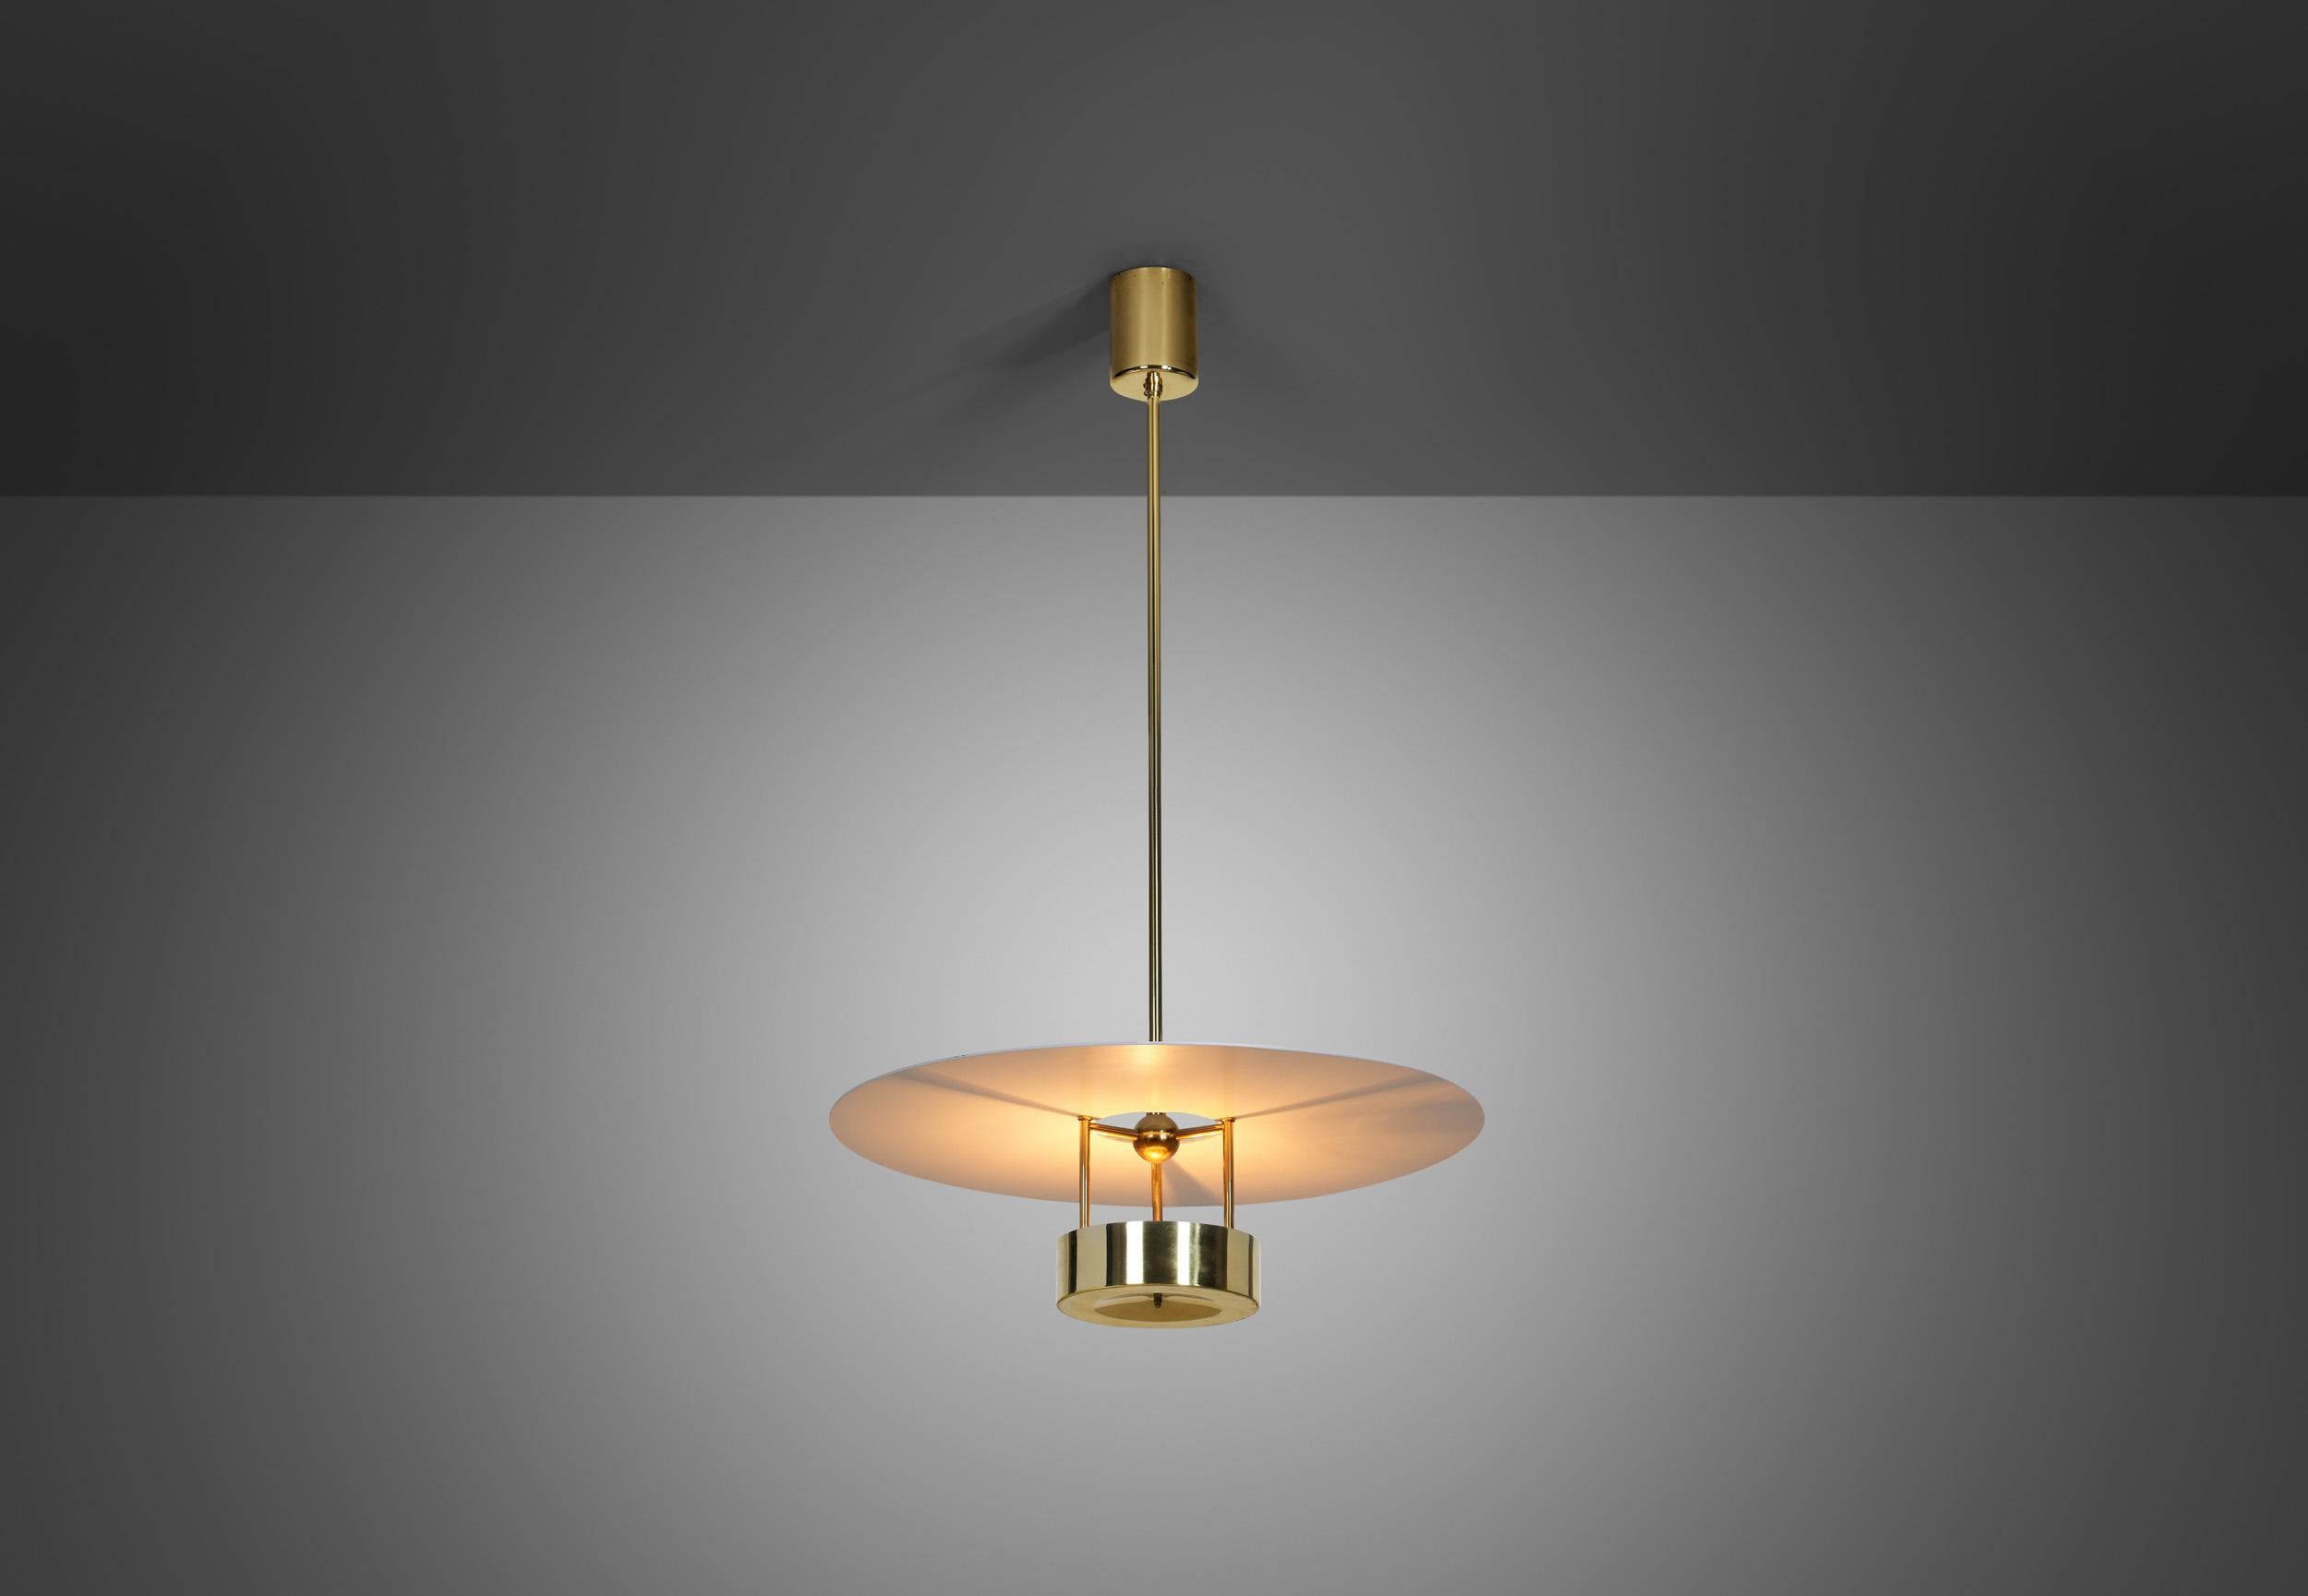 The “T-995” hanging lamp is a stunning example of Swedish modern design. Hans-Agne Jakobsson was a prominent designer and lighting manufacturer, who played a crucial role in shaping the aesthetic of Swedish design during the mid- and even later part